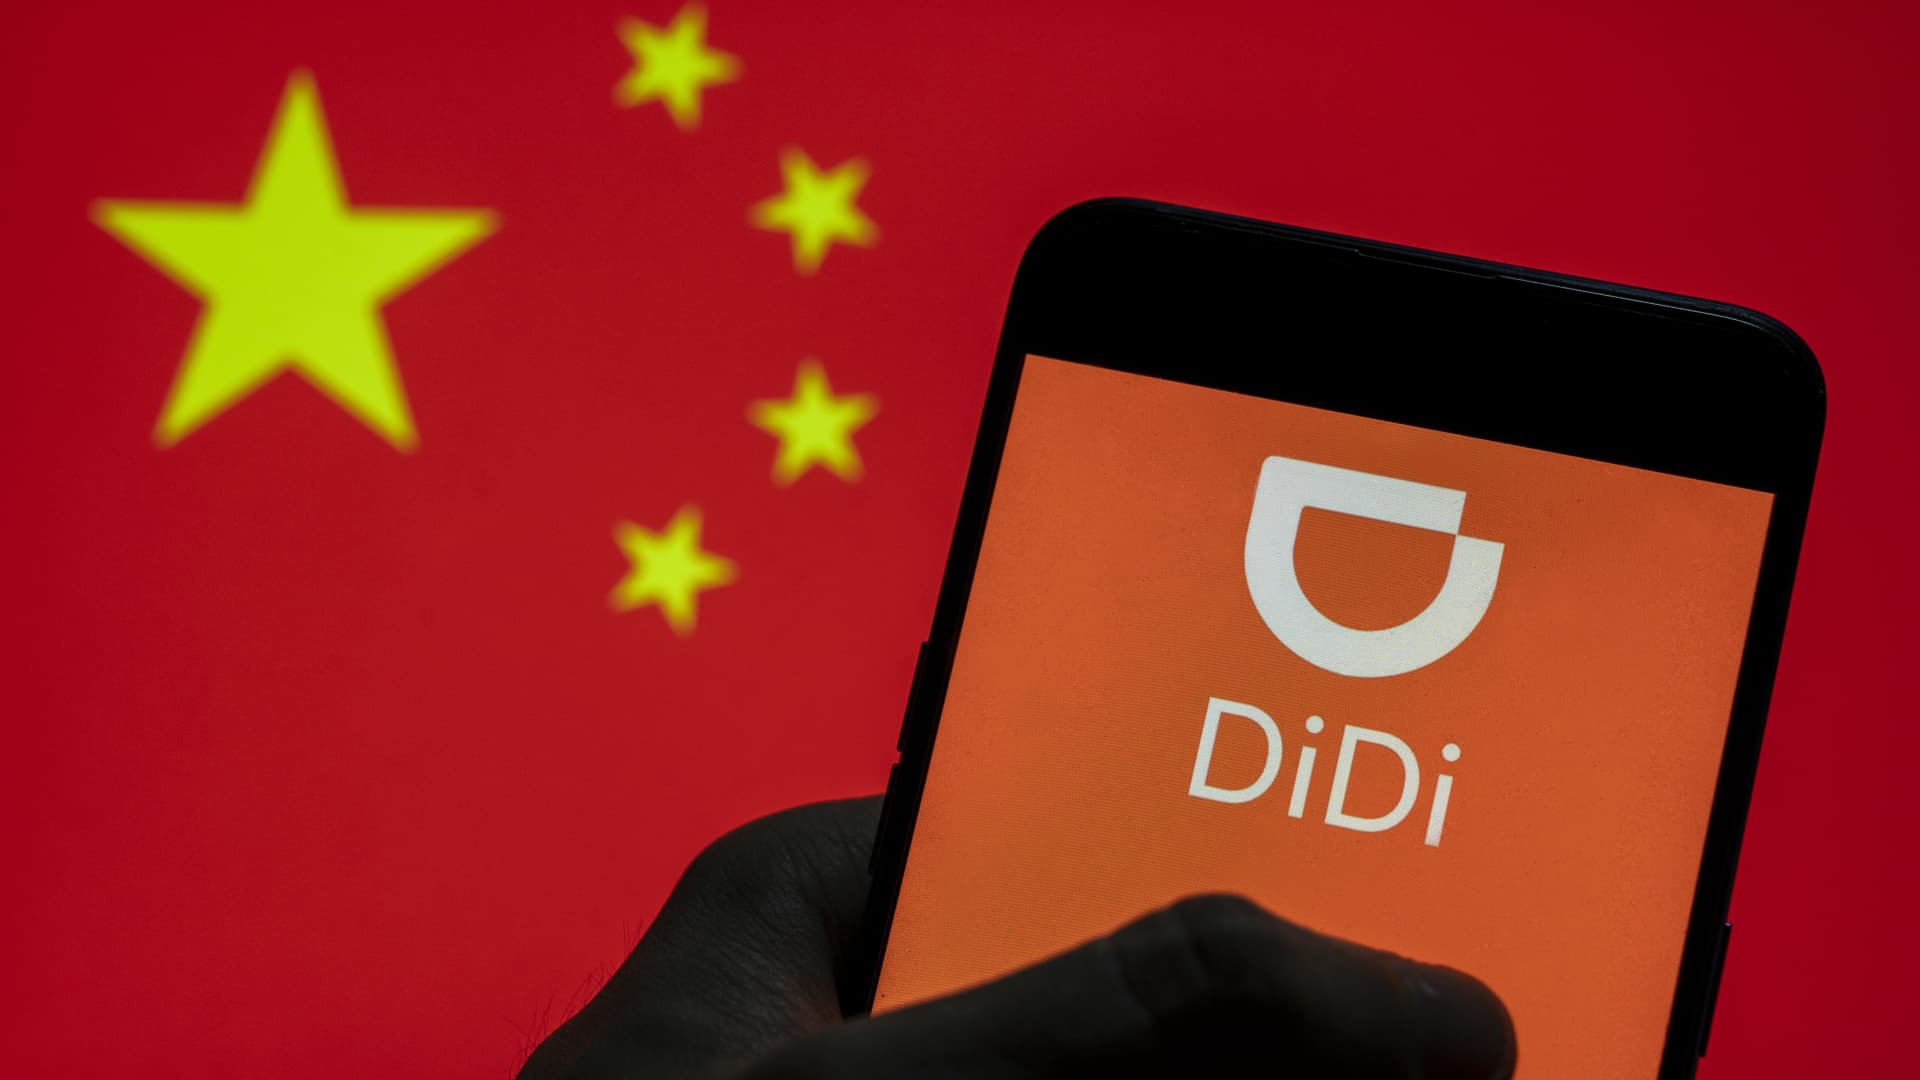 Chinese ride-hailing giant Didi surges 50% after report that regulators are ending probes